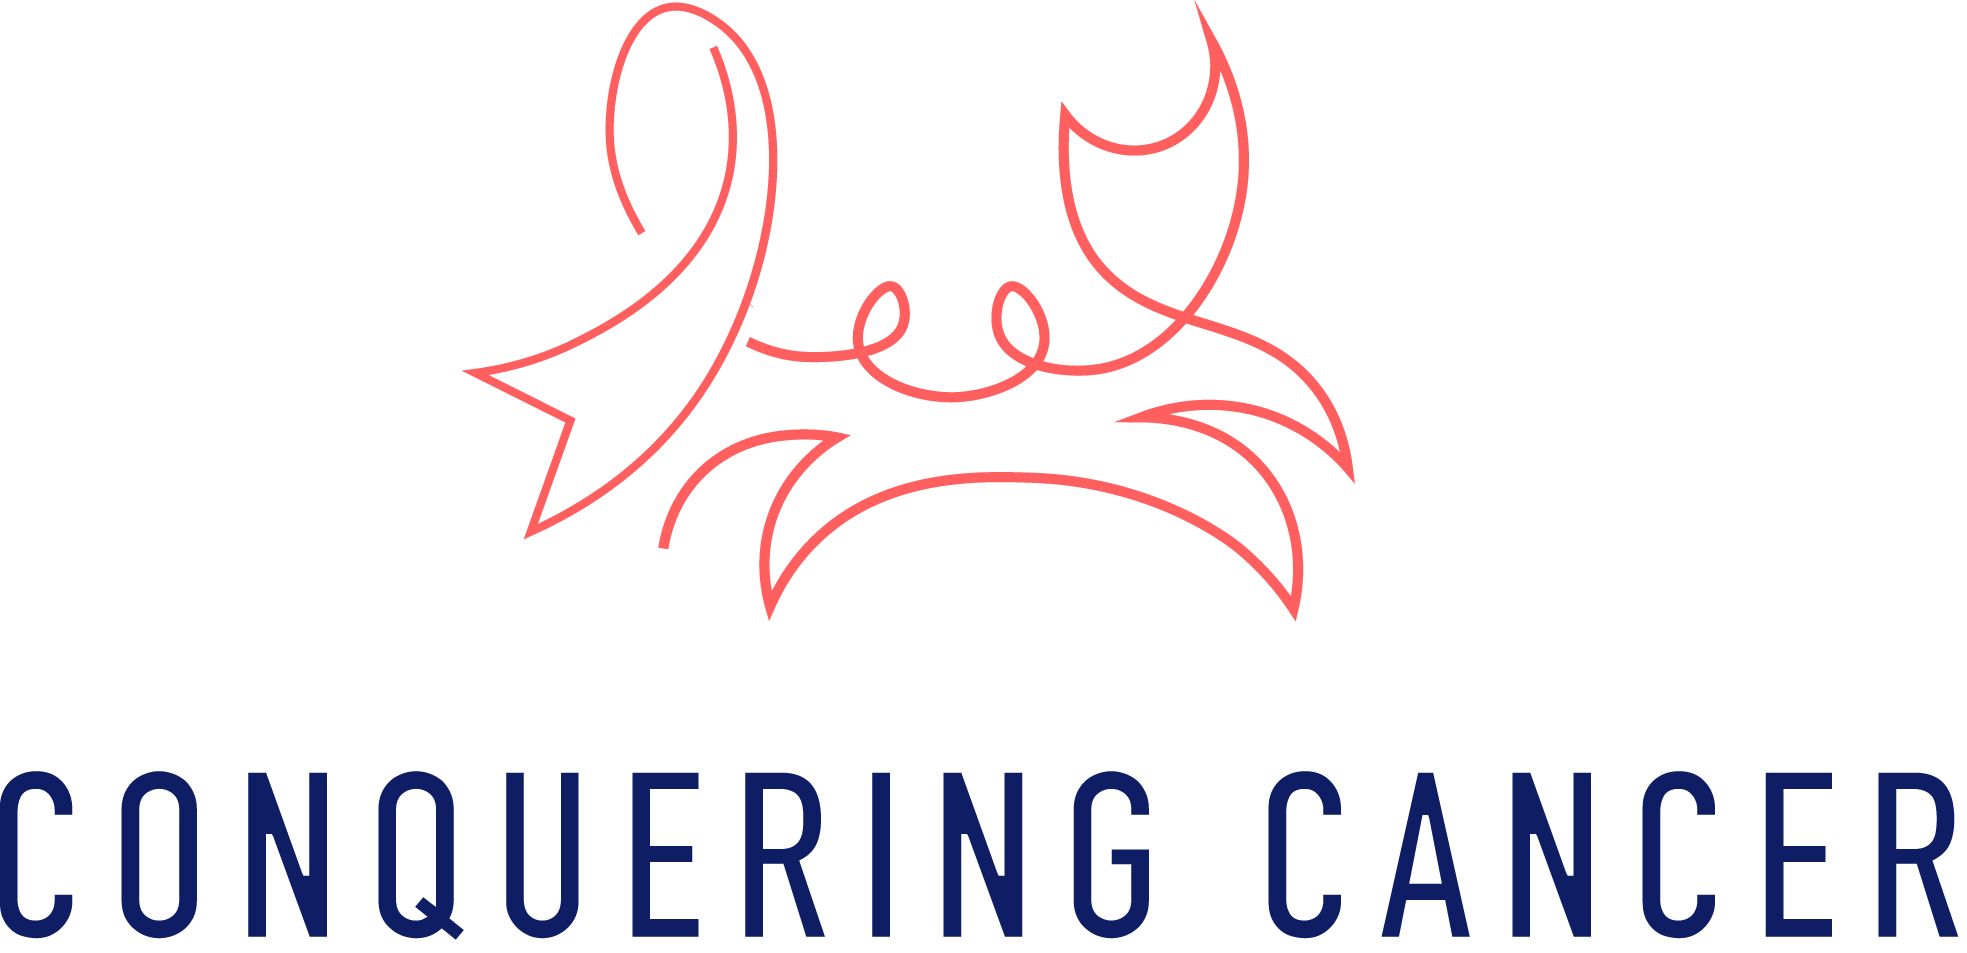 Conquering Cancer Logotype